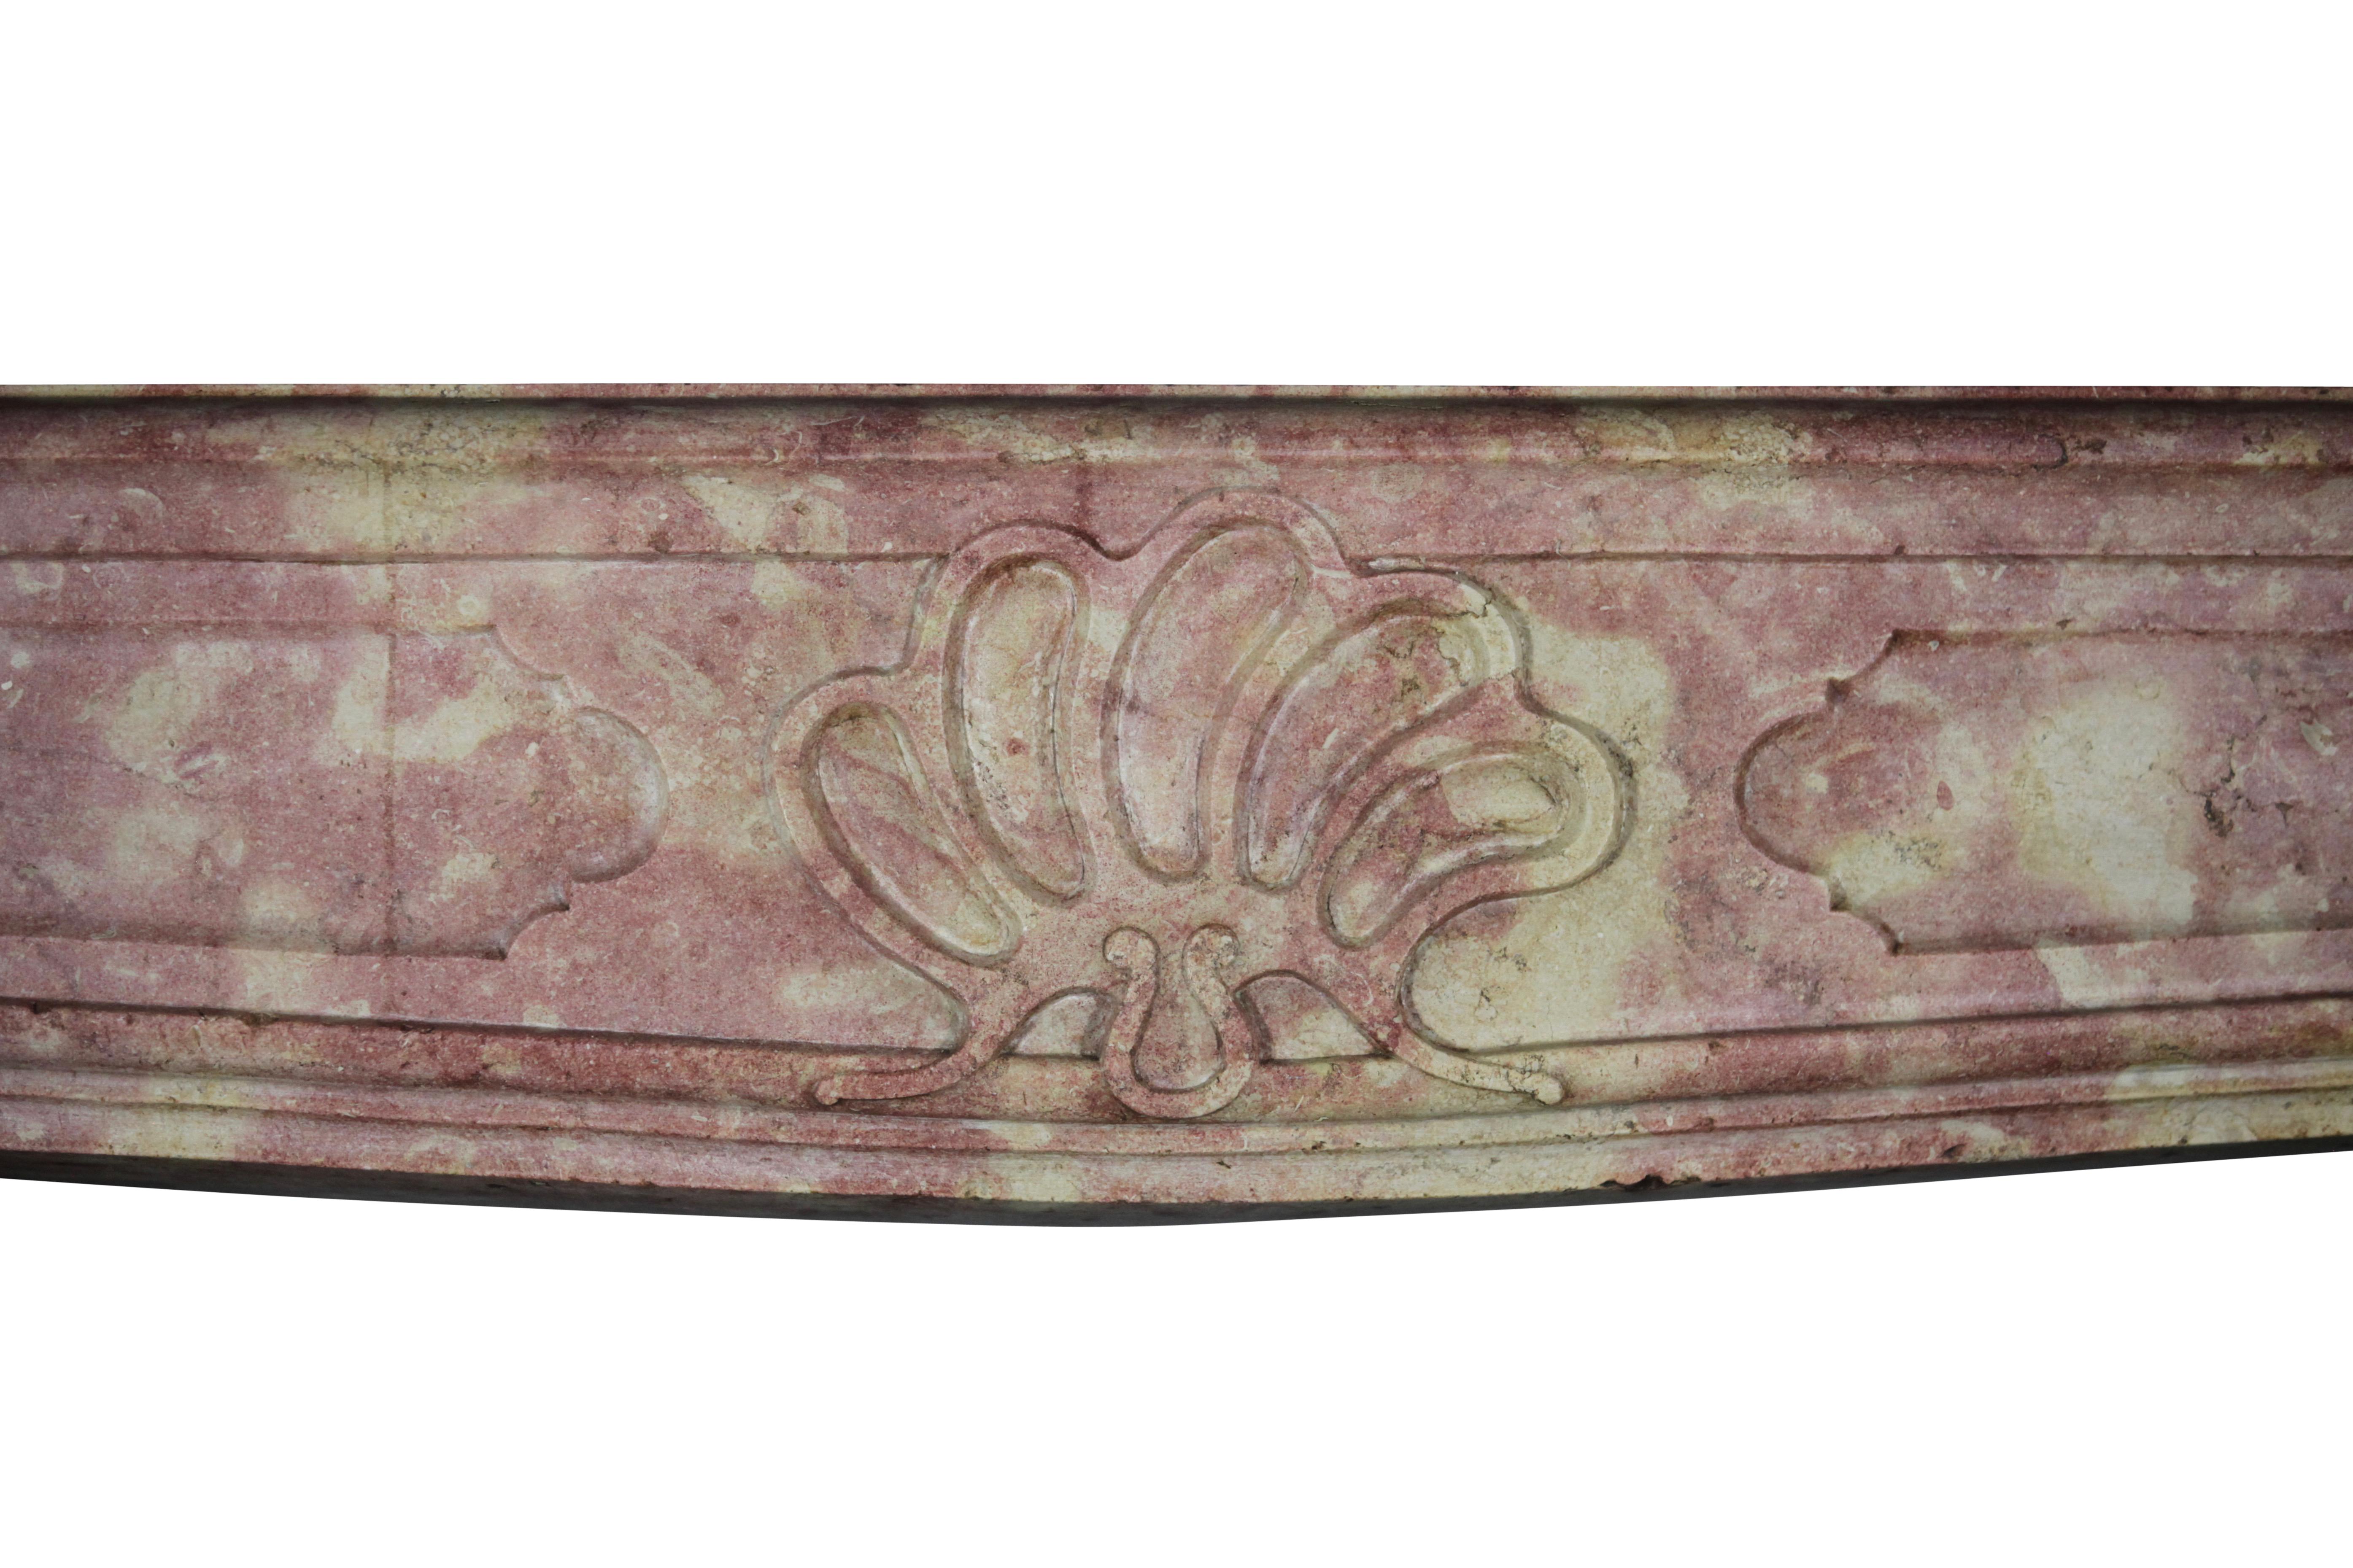 This original fine European antique fireplace surround is coming from the French Burgundy region. It is a regency period mantle piece in Burgundy hard stone. It also has retour to built a double upper mantle. The mantle has a French naive country